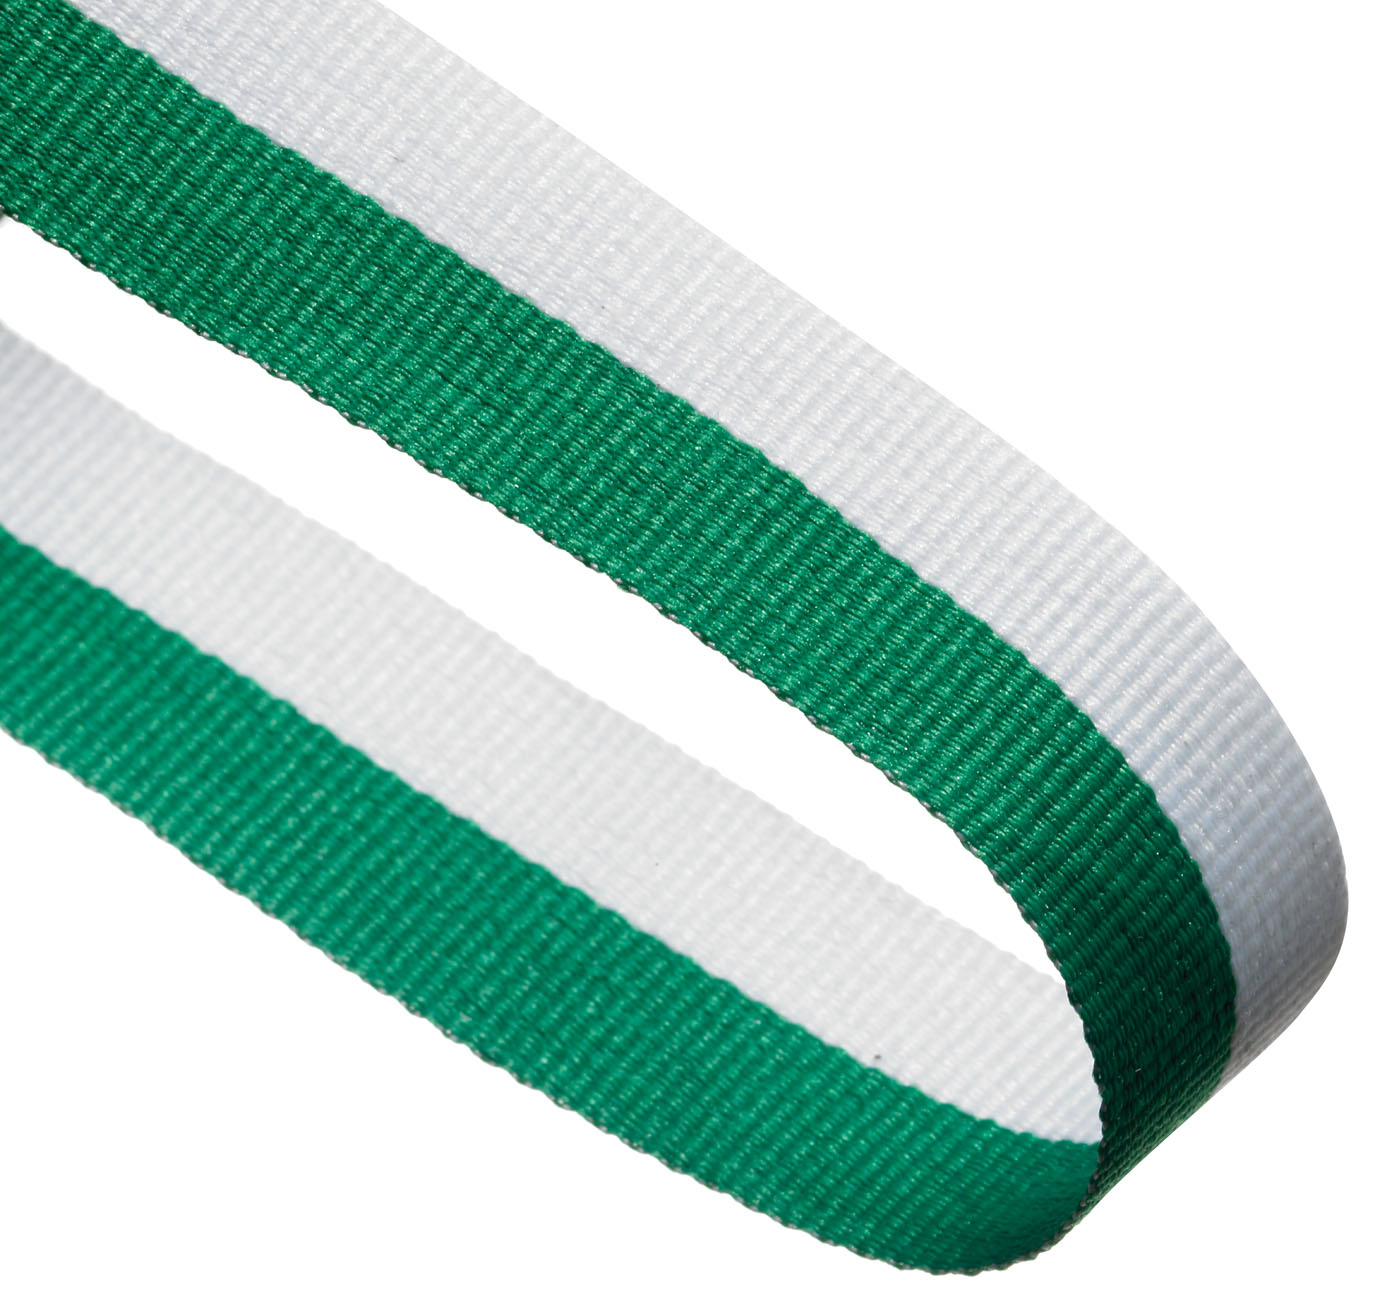 Green / White Woven Medal Ribbons With Clip